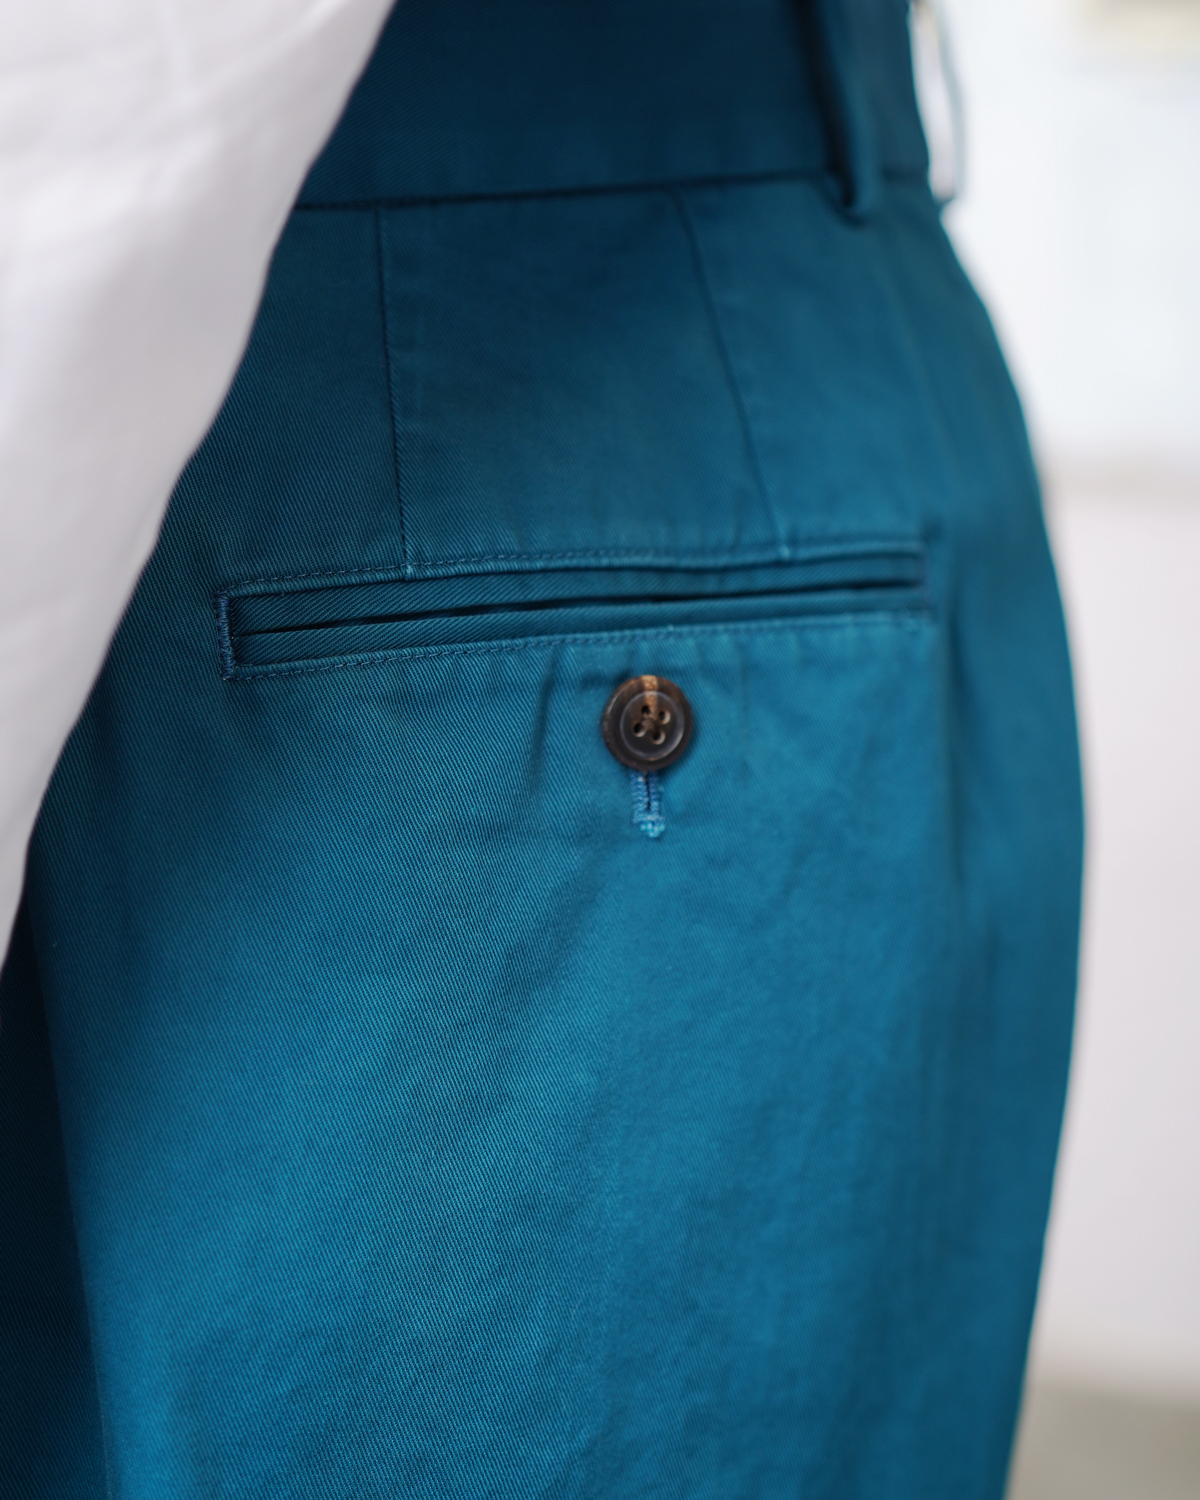 NEAT｜NEAT Chino - Blue Green｜PRODUCT｜Continuer Inc.｜メガネ